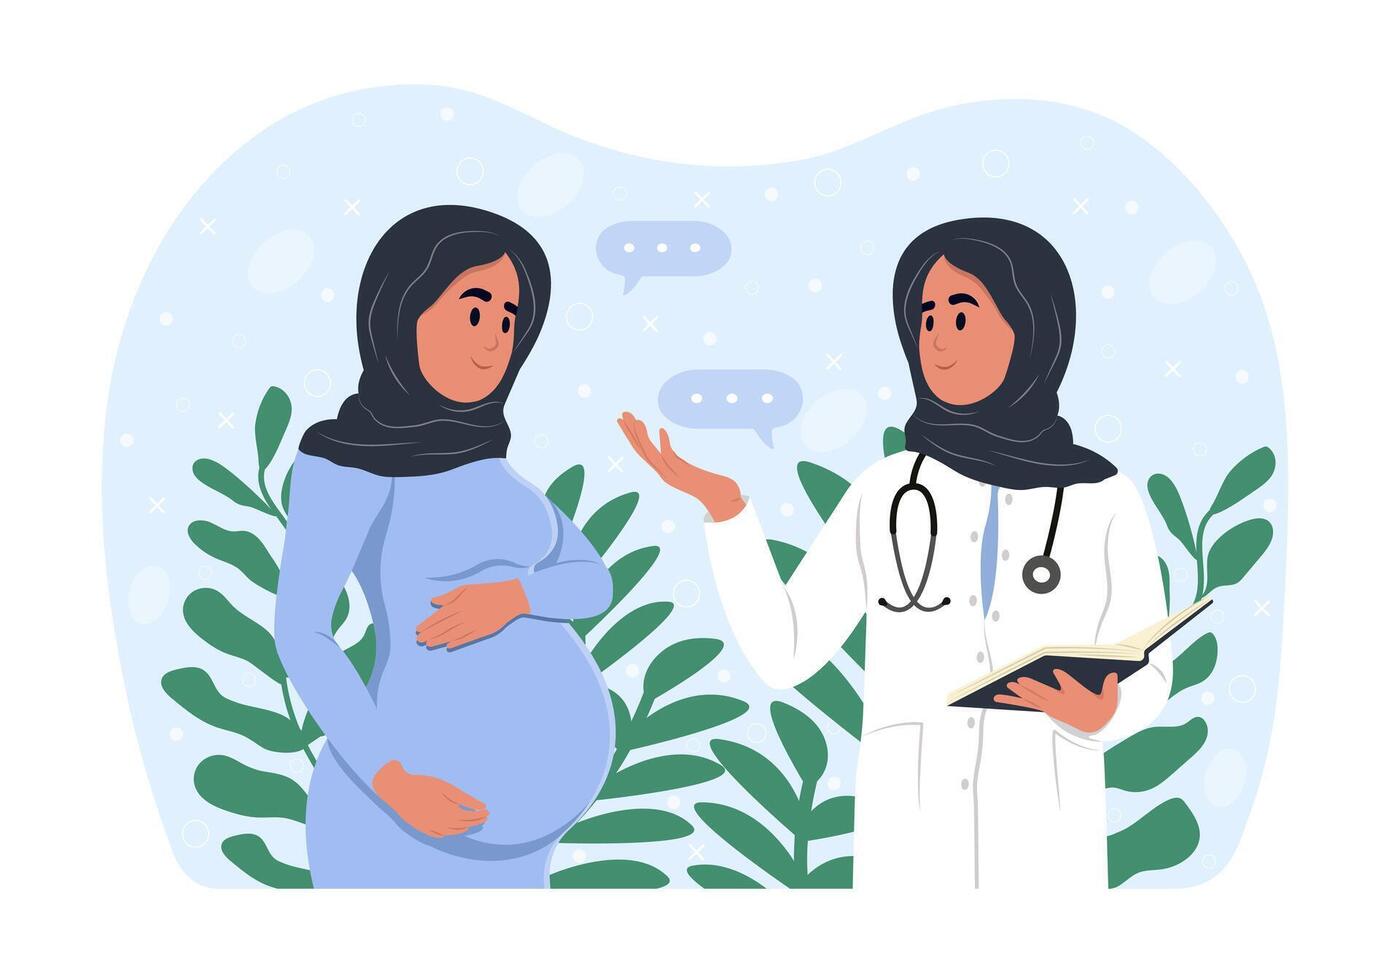 Muslim woman expecting a baby visits the doctors office, examination during pregnancy. A pregnant woman is talking to an obstetrician gynecologist. vector